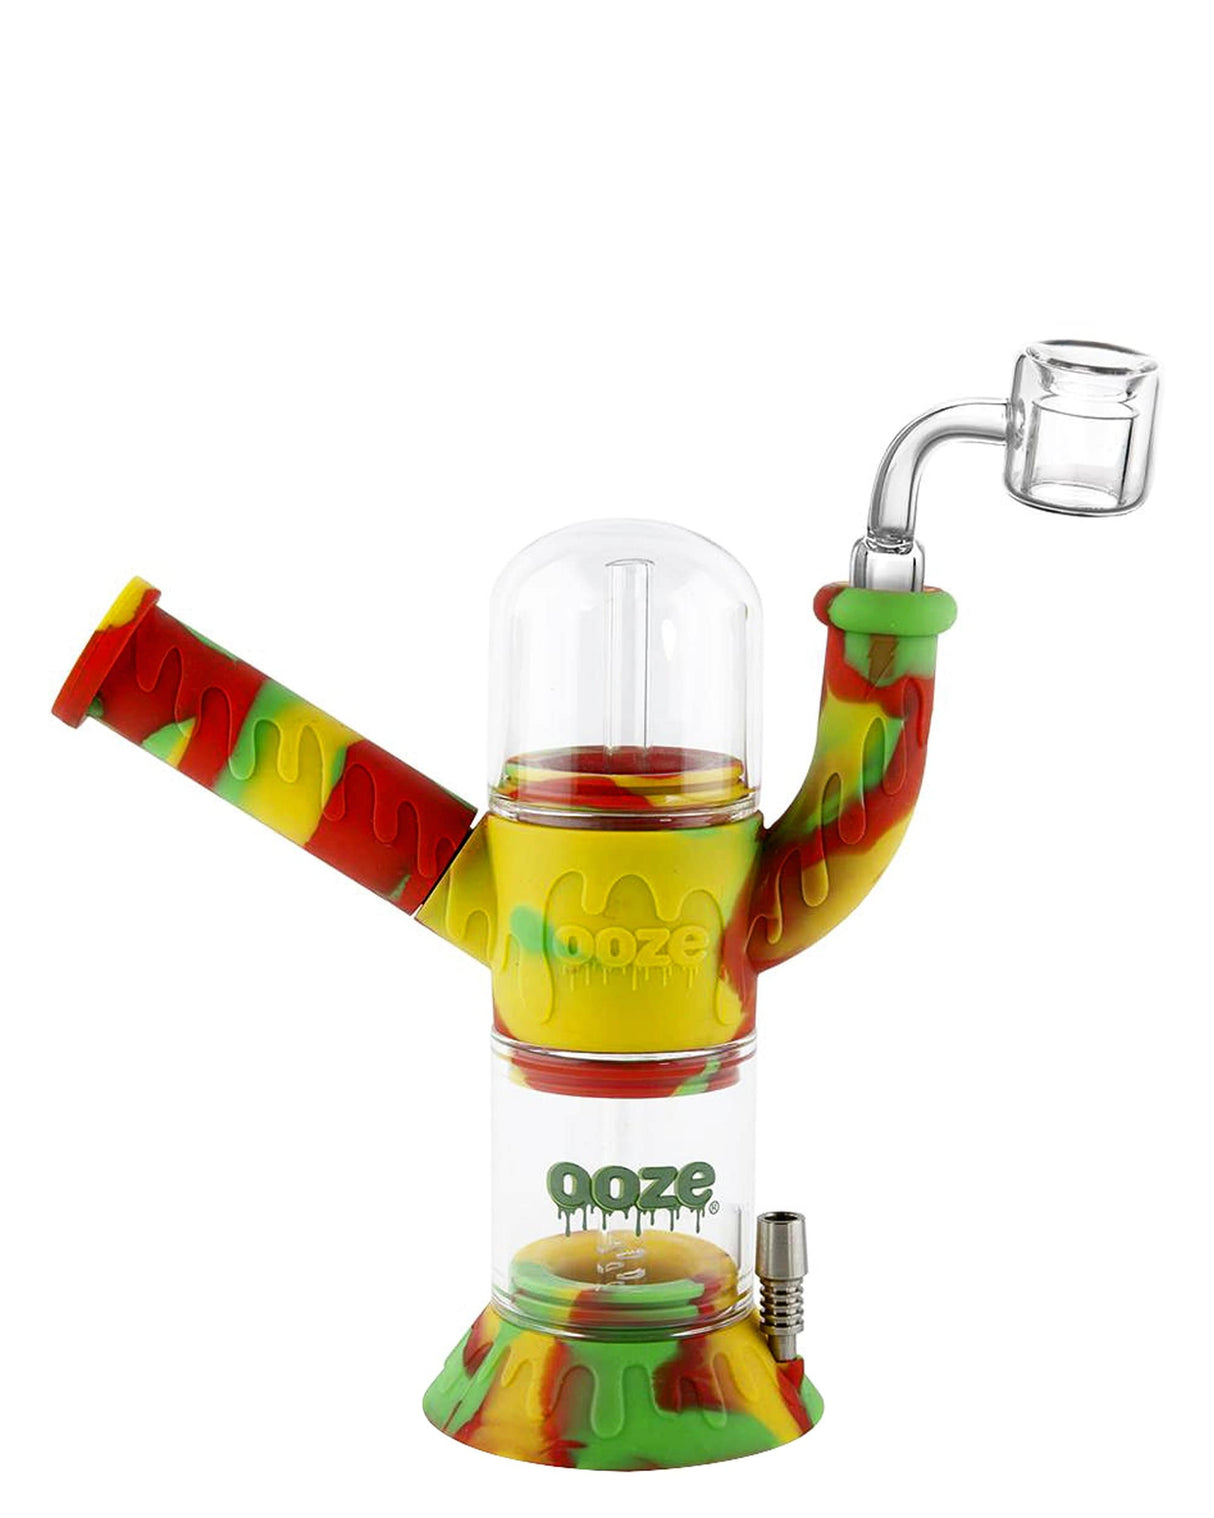 Ooze Cranium Bong & Dab Rig in vibrant red, yellow, and green, front view with quartz banger